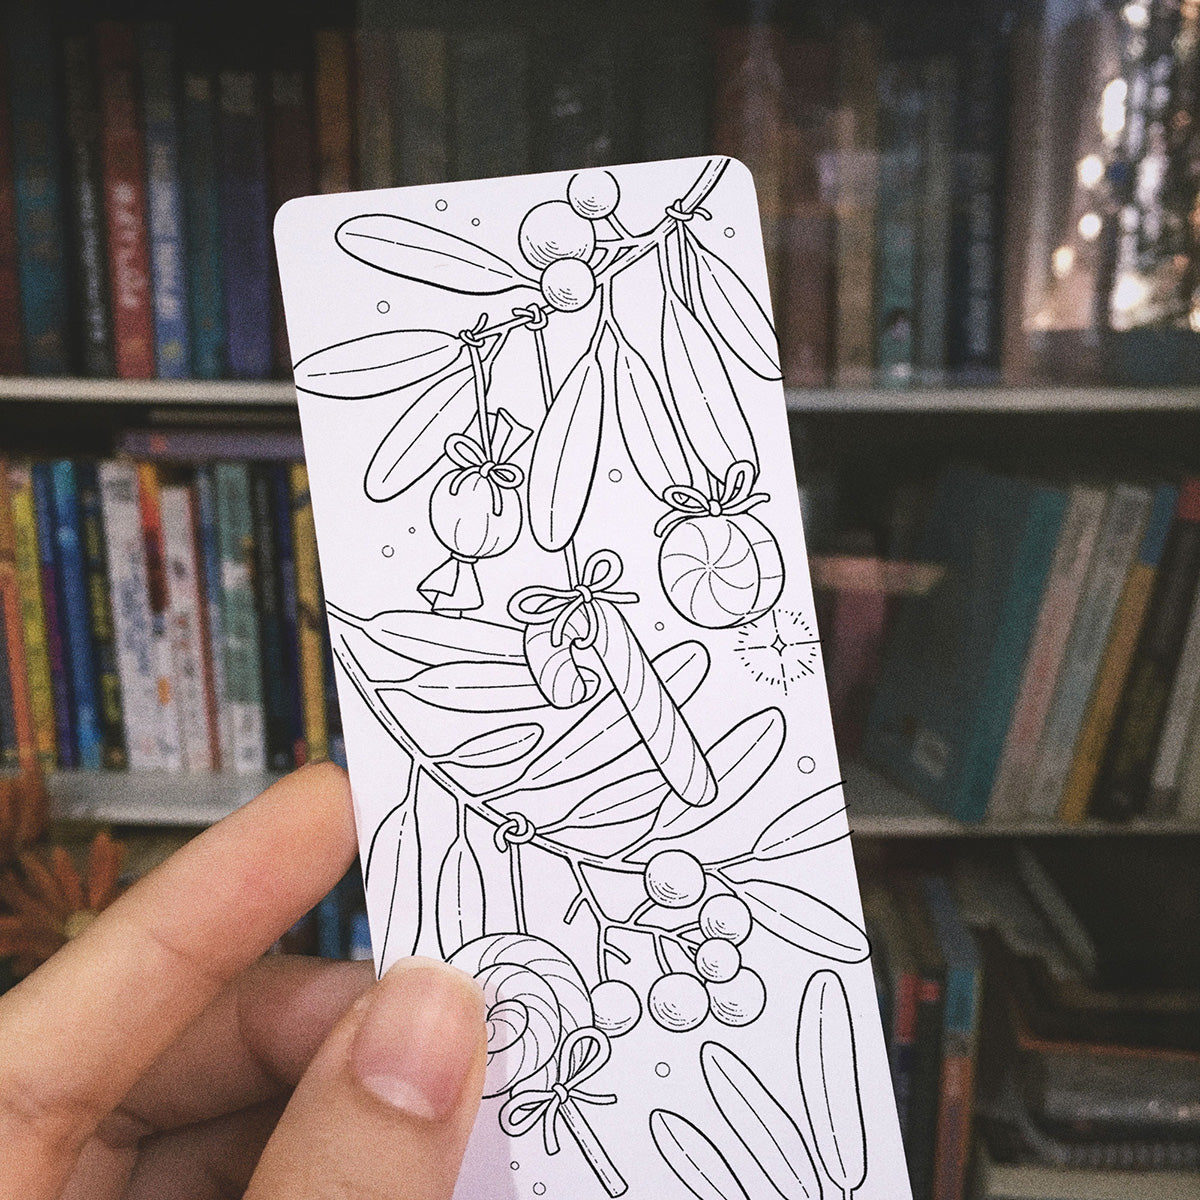 Winter Coloring Bookmarks - BM114